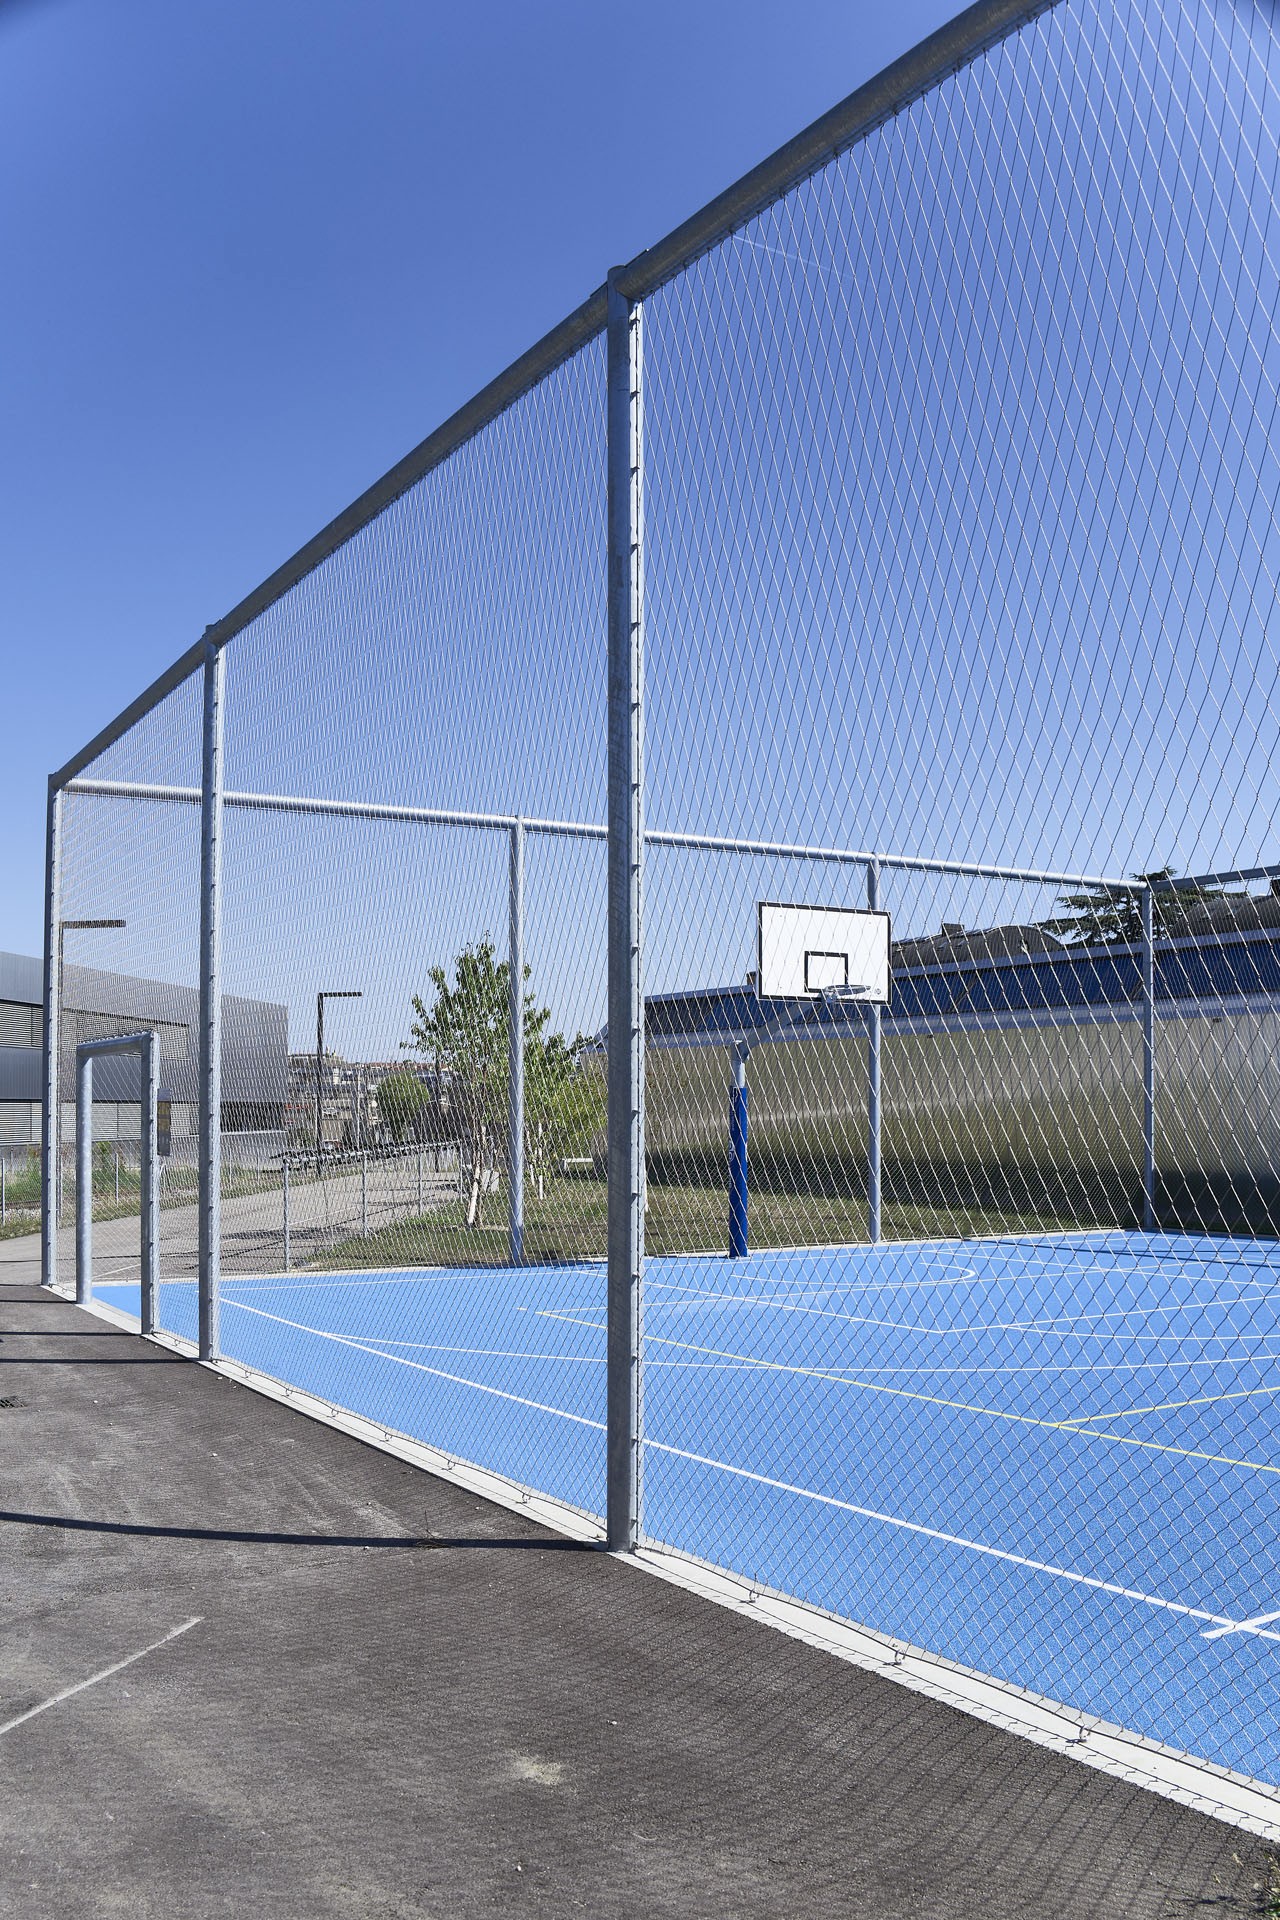 Wire rope mesh on basketball court